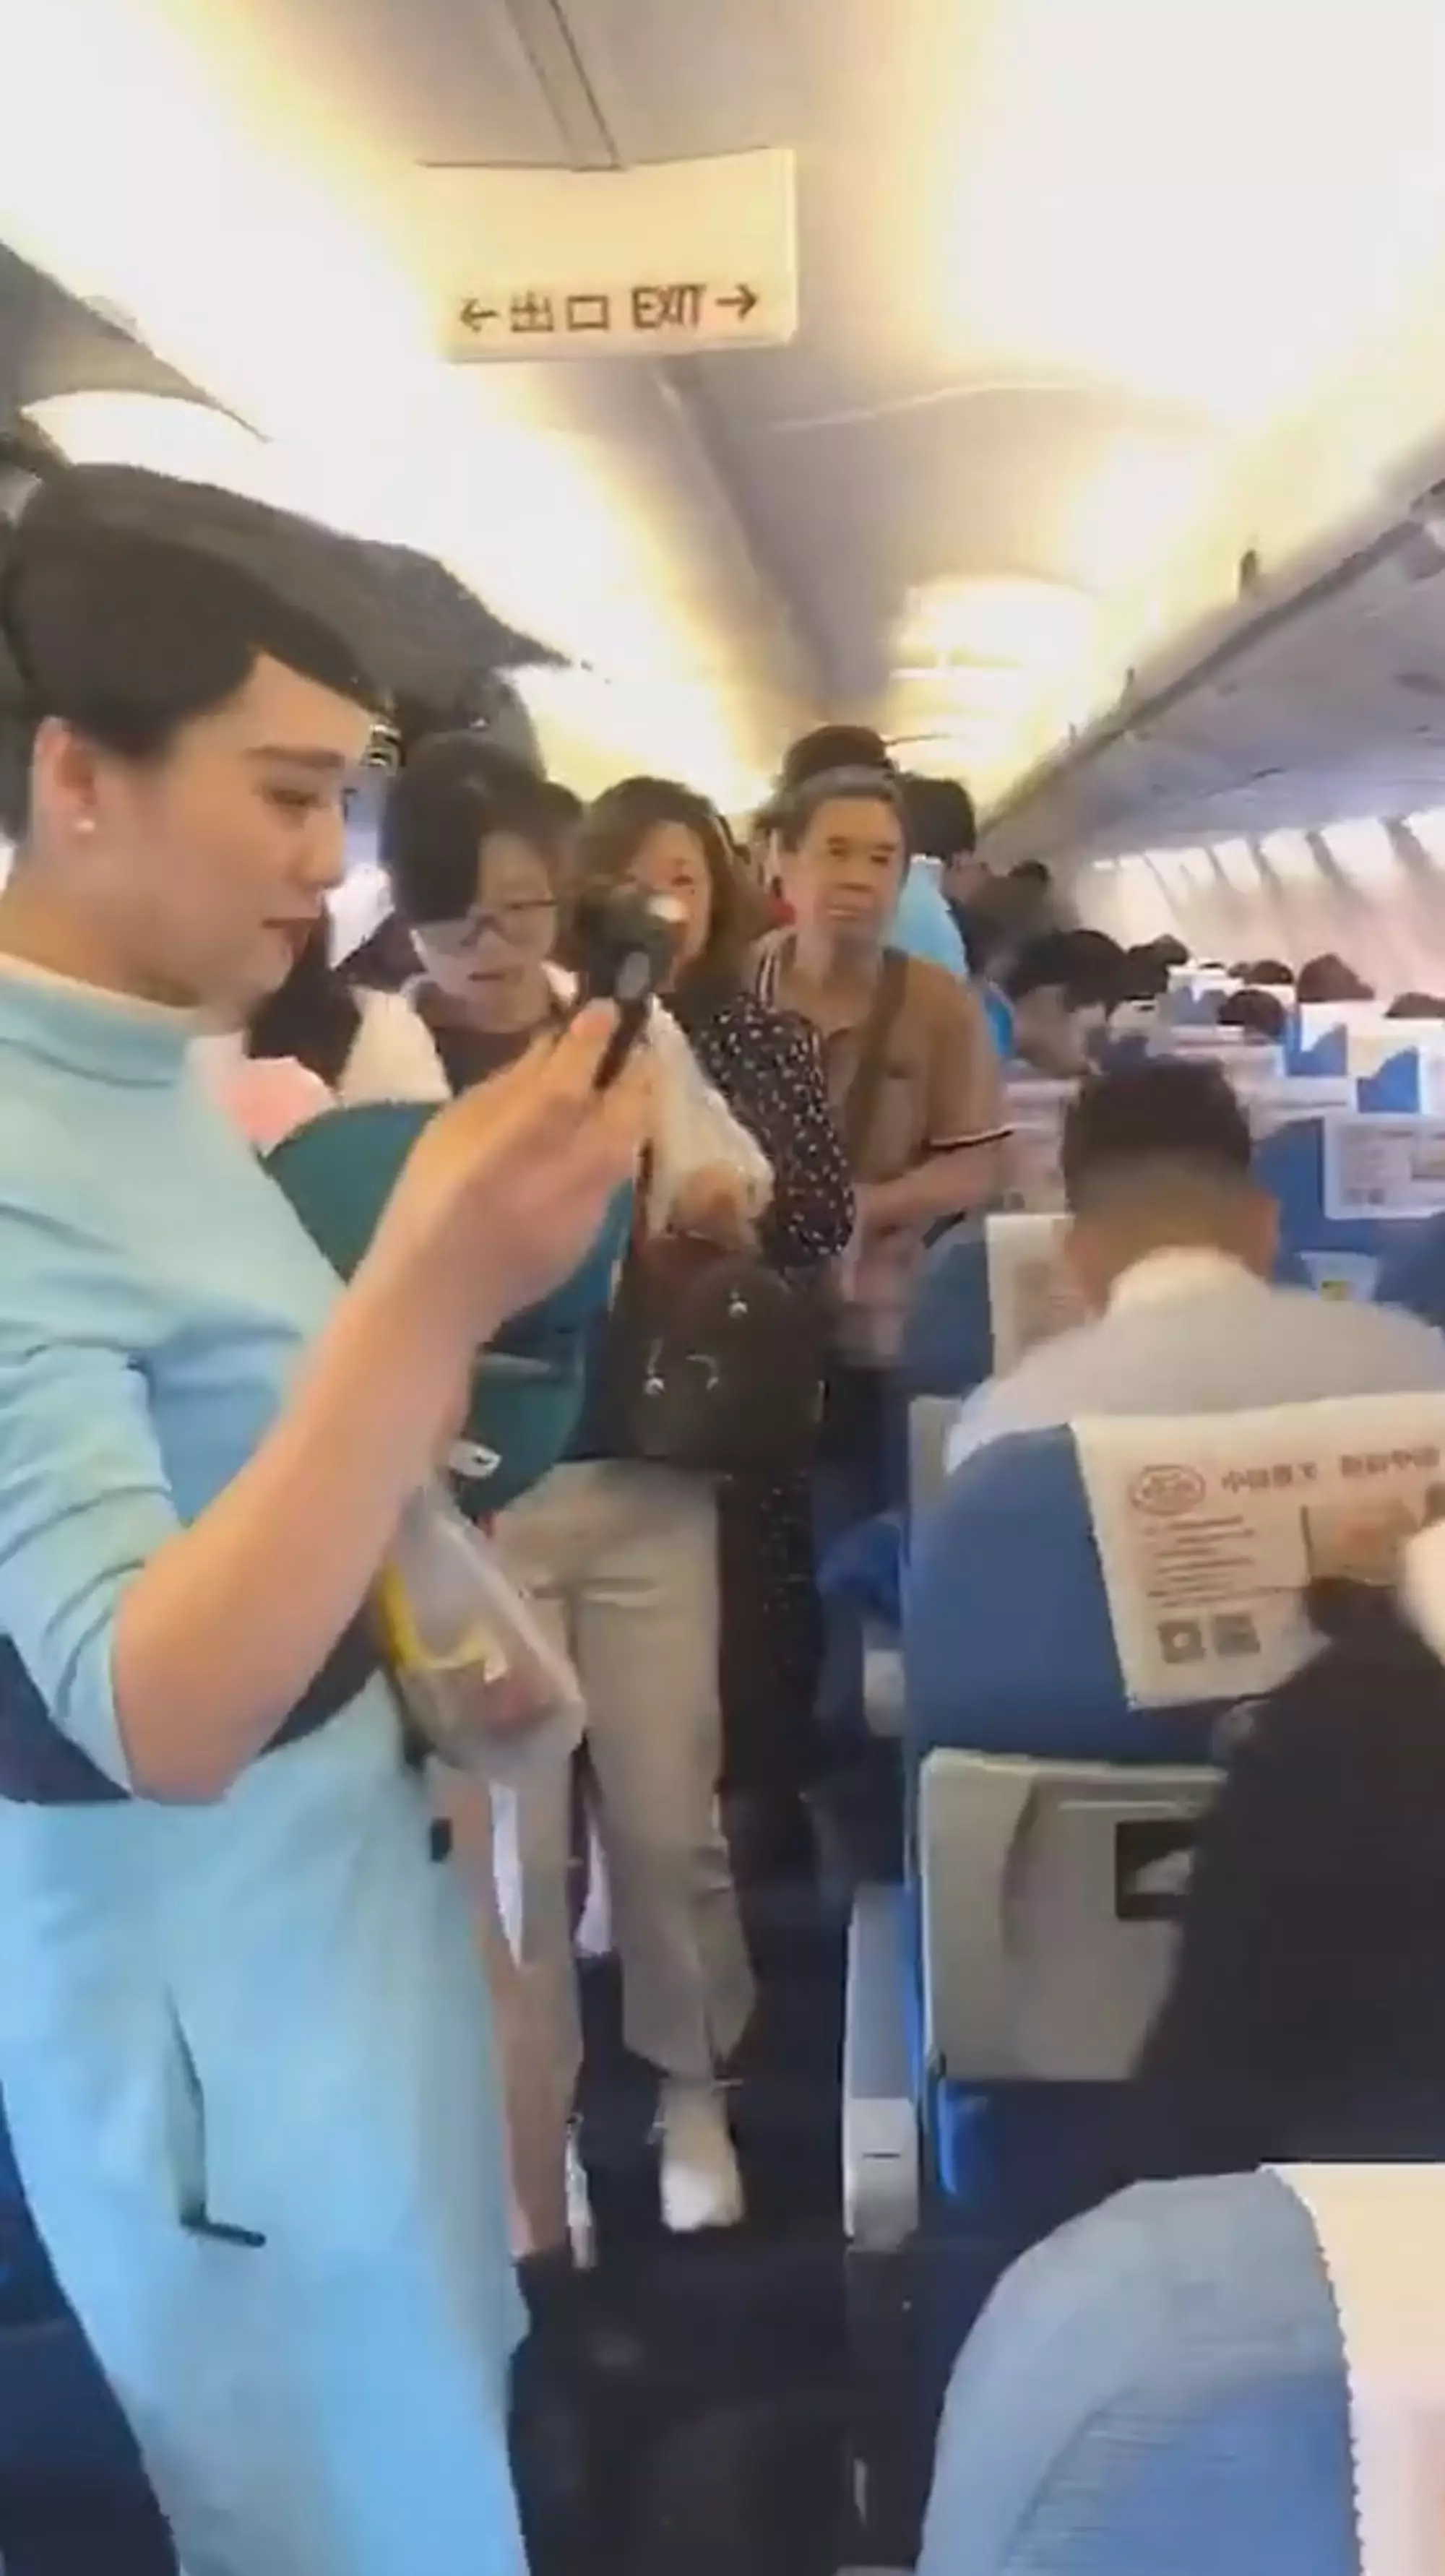 Cabin crew and confused passengers inside the delayed Xiamen Airlines flight.